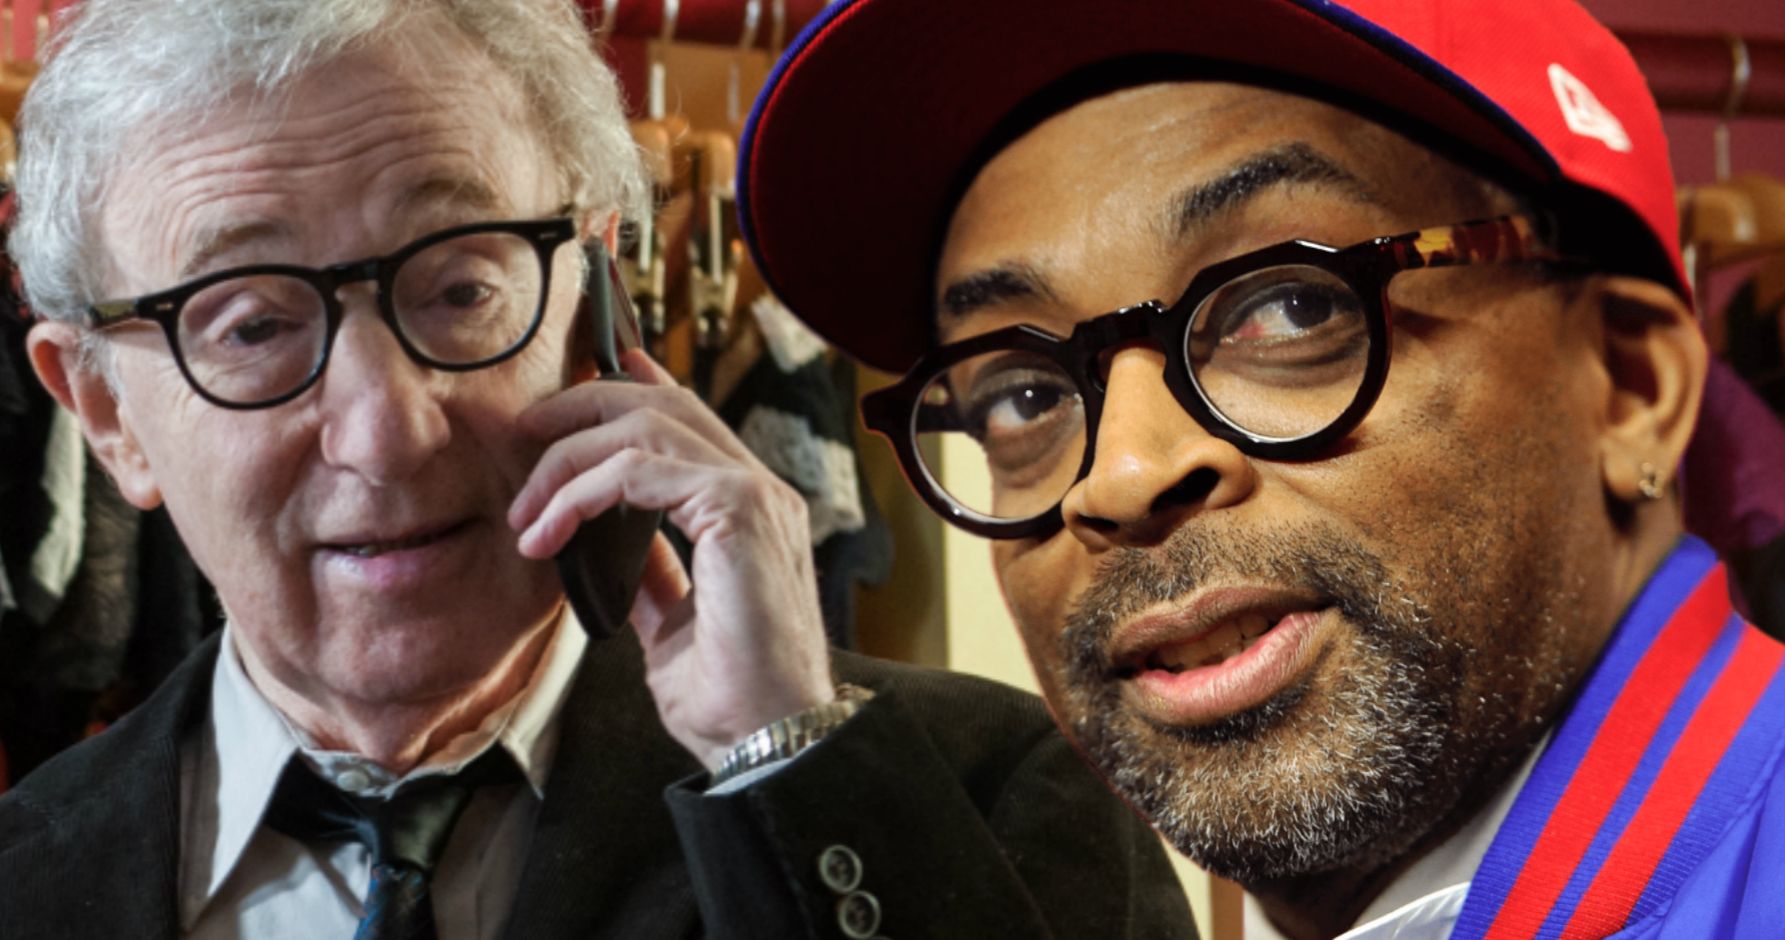 Spike Lee Deeply Apologizes for Defending Woody Allen: My Words Were Wrong